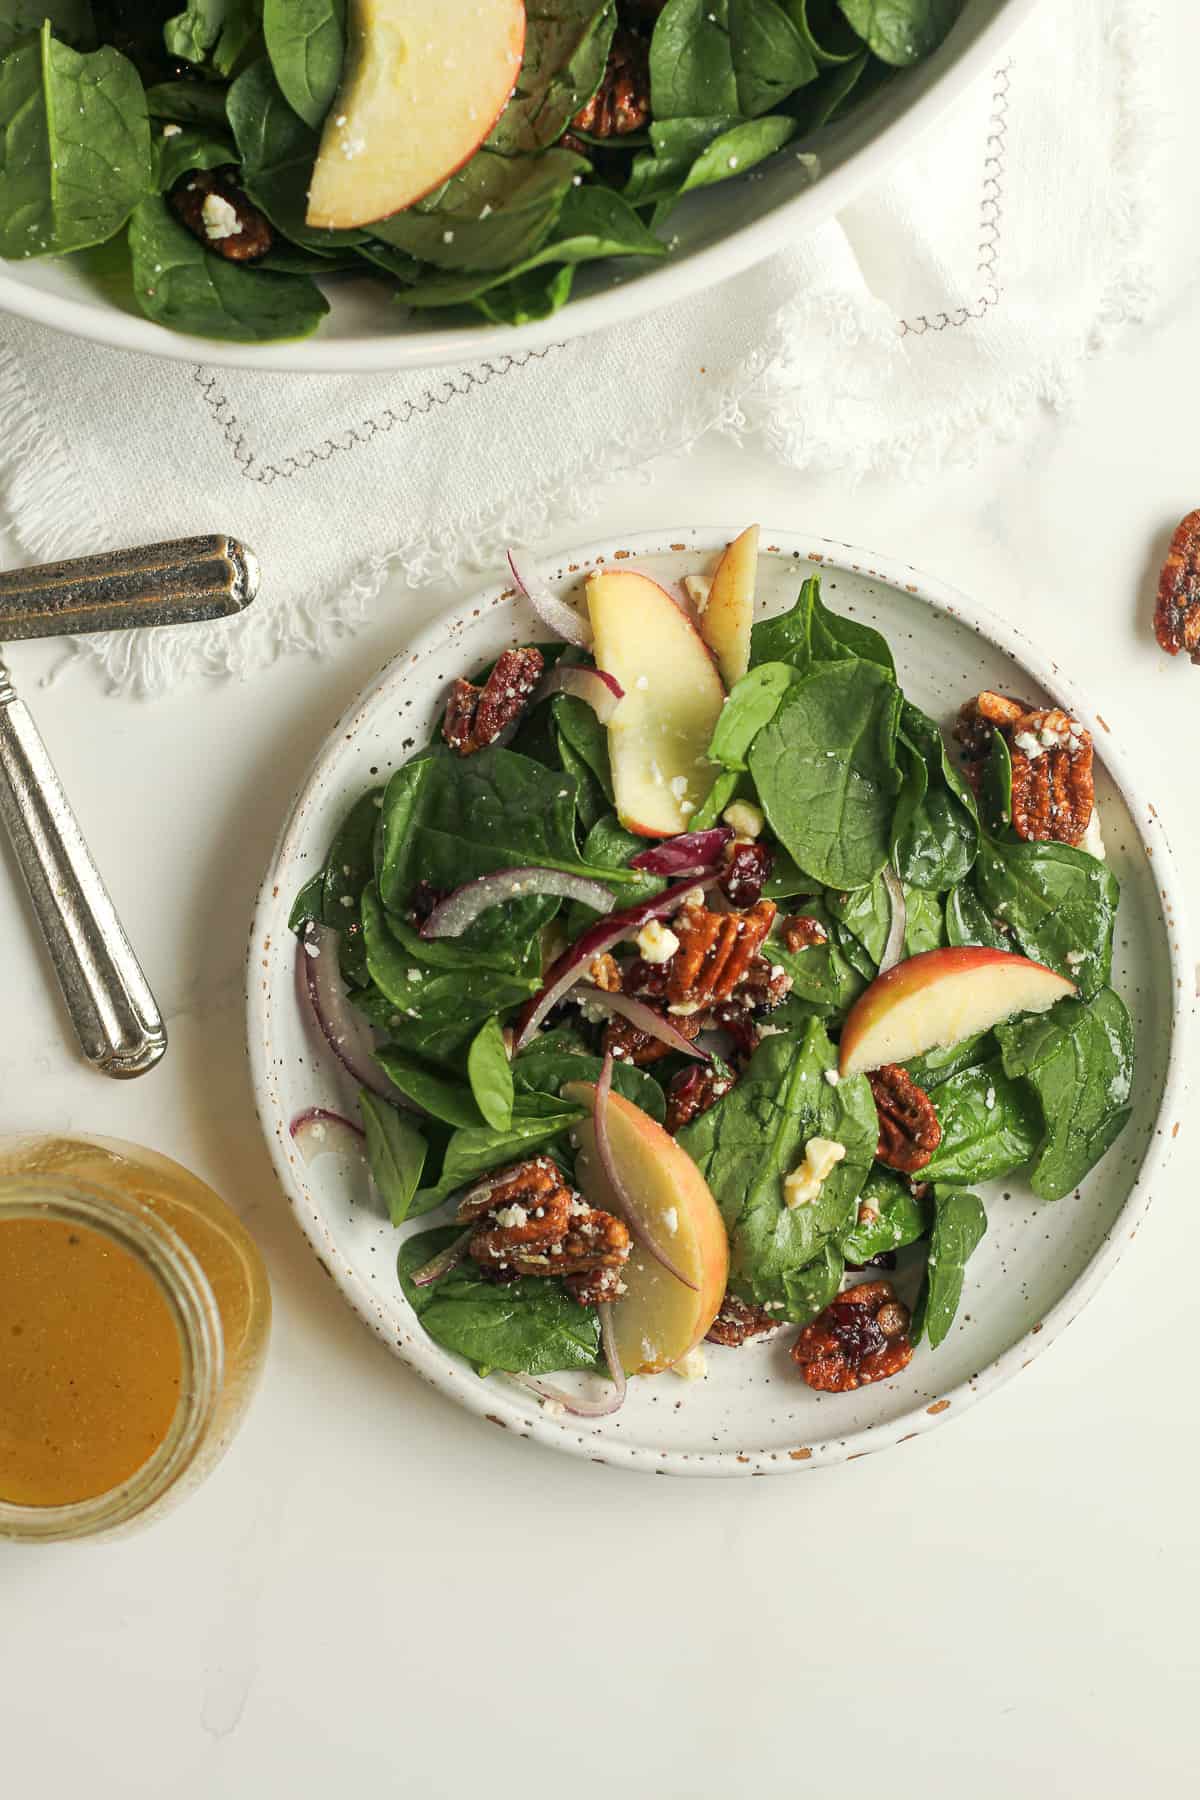 Candied Pecan Salad with Apples